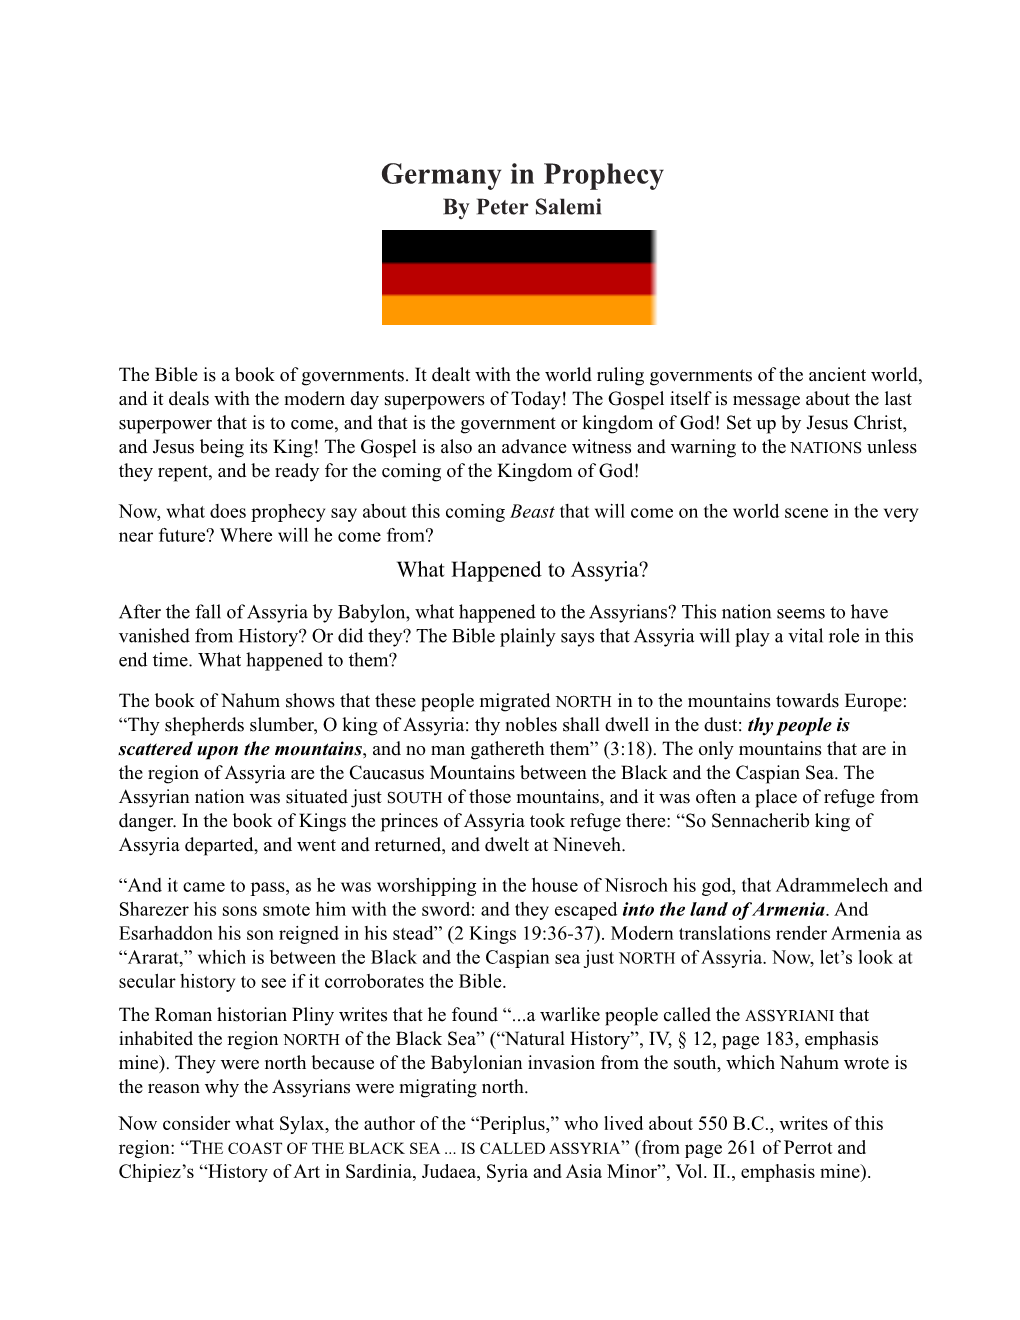 Germany in Prophecy by Peter Salemi